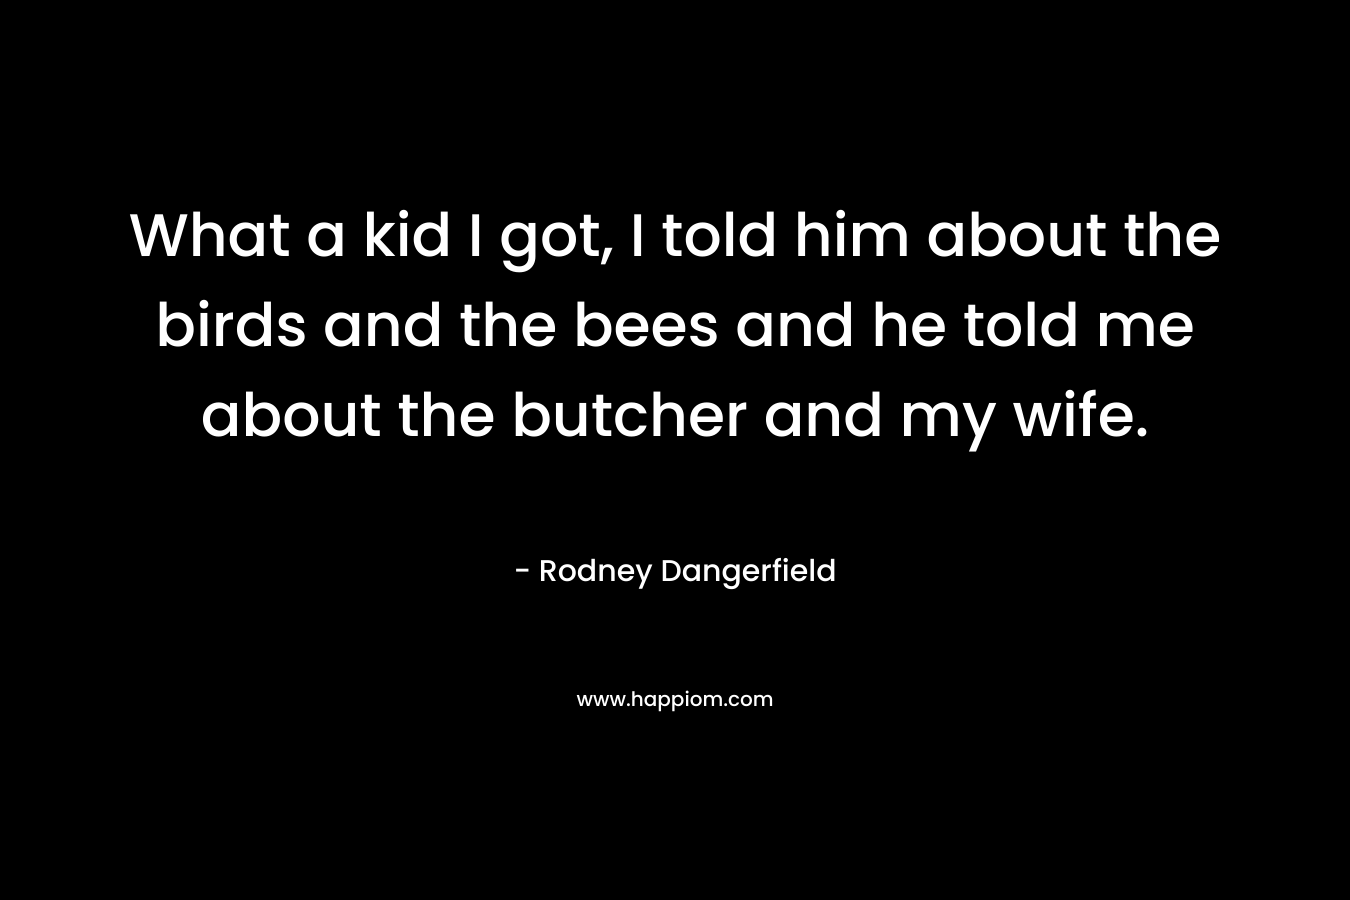 What a kid I got, I told him about the birds and the bees and he told me about the butcher and my wife.